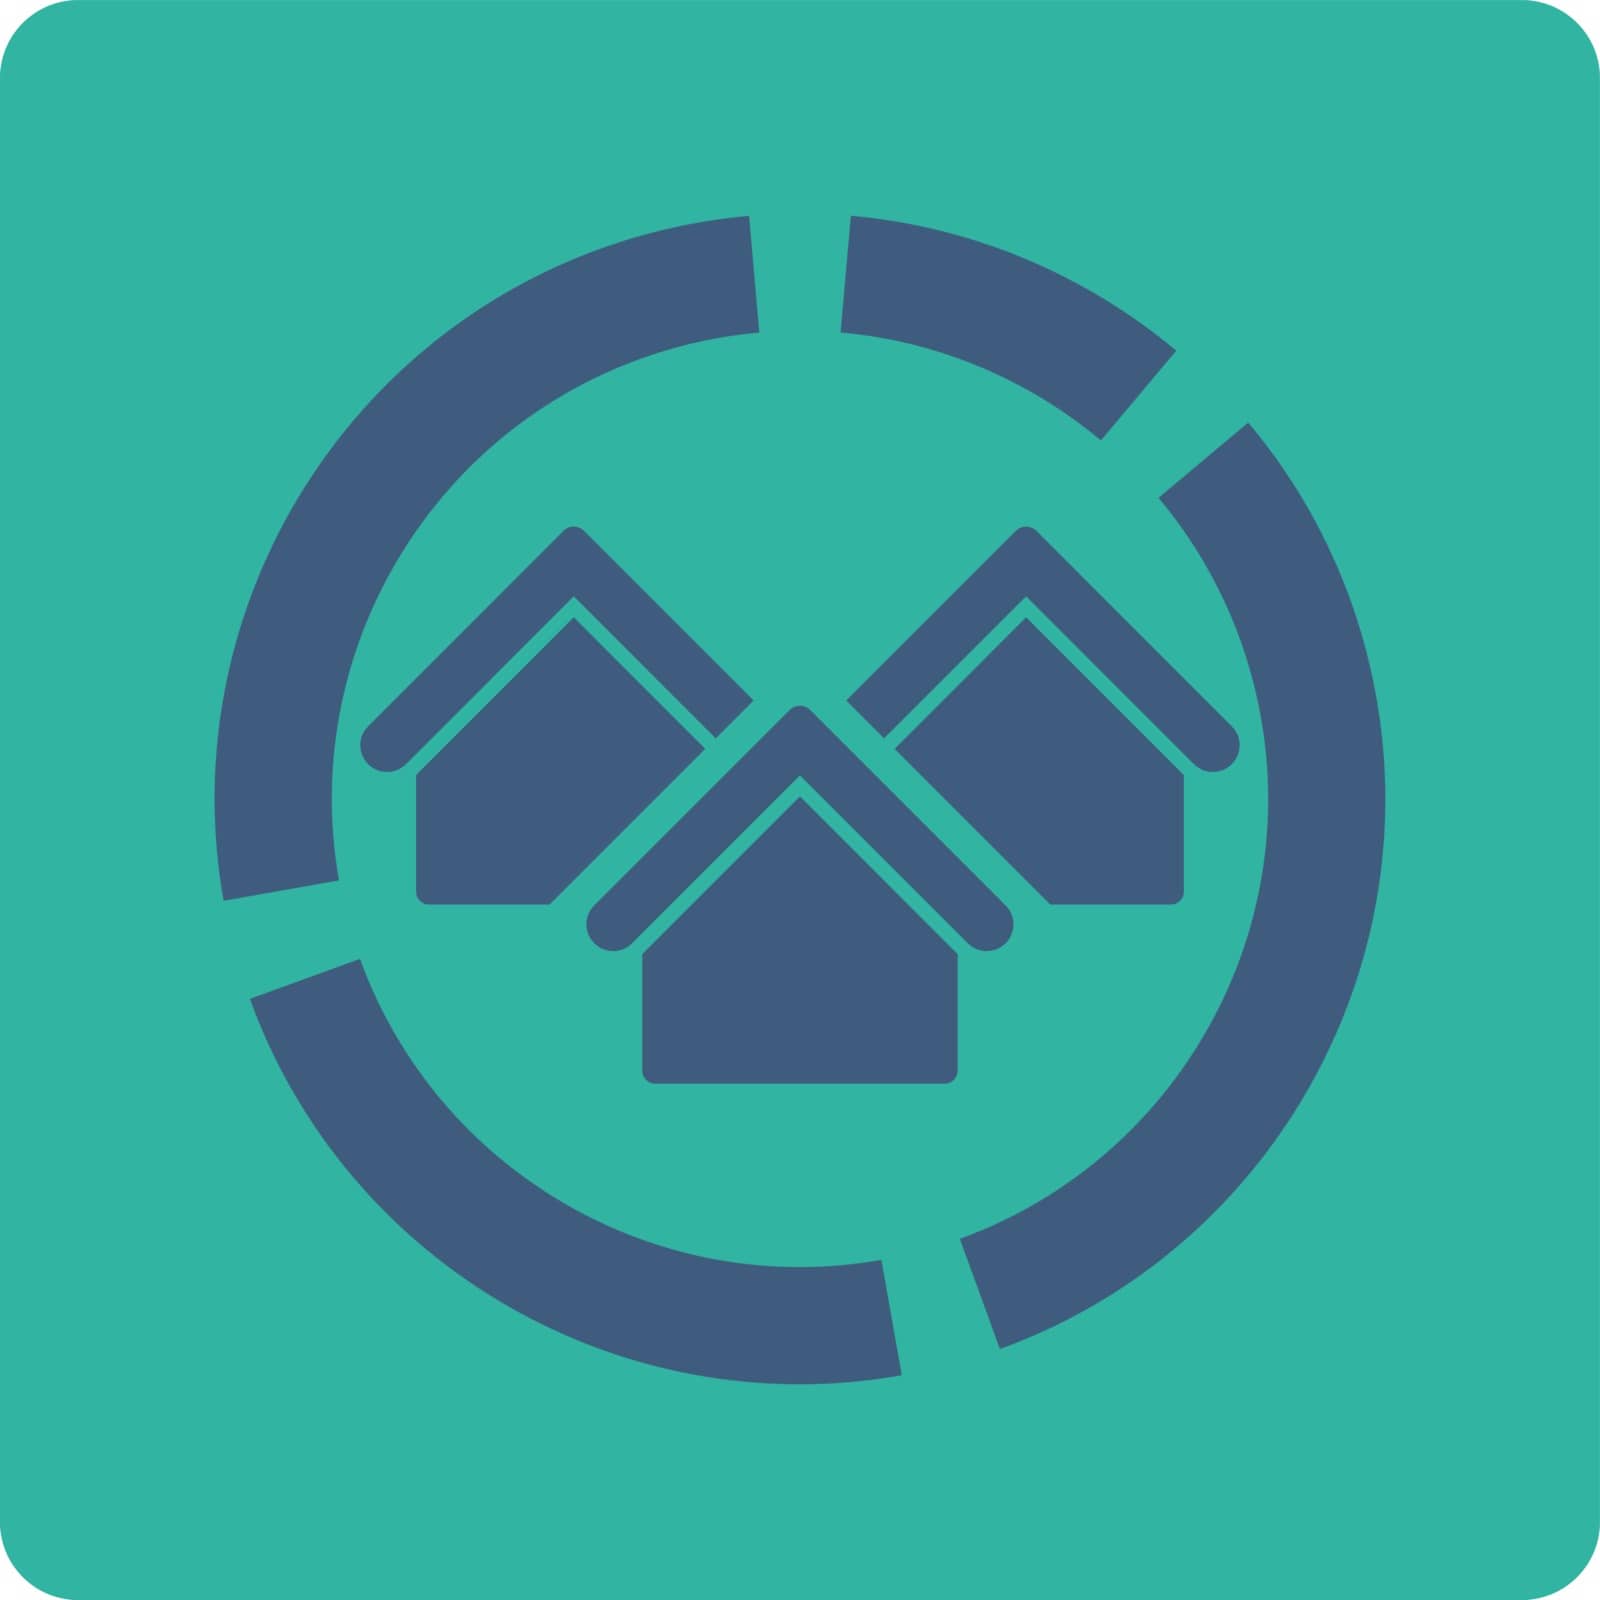 Realty diagram icon by ahasoft